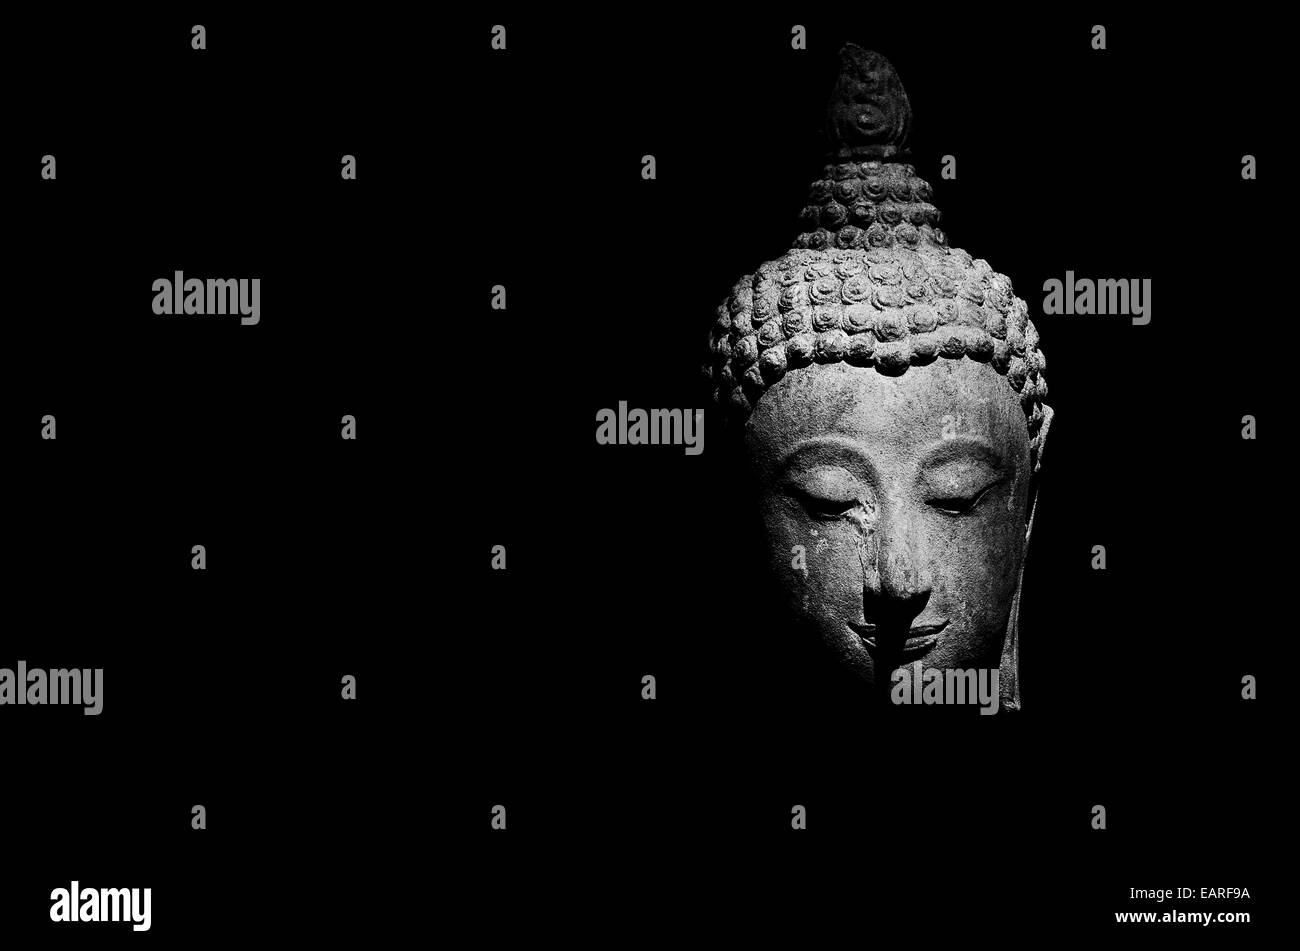 Buddharupa,Buddhism for statues or models of the Buddha. Stock Photo